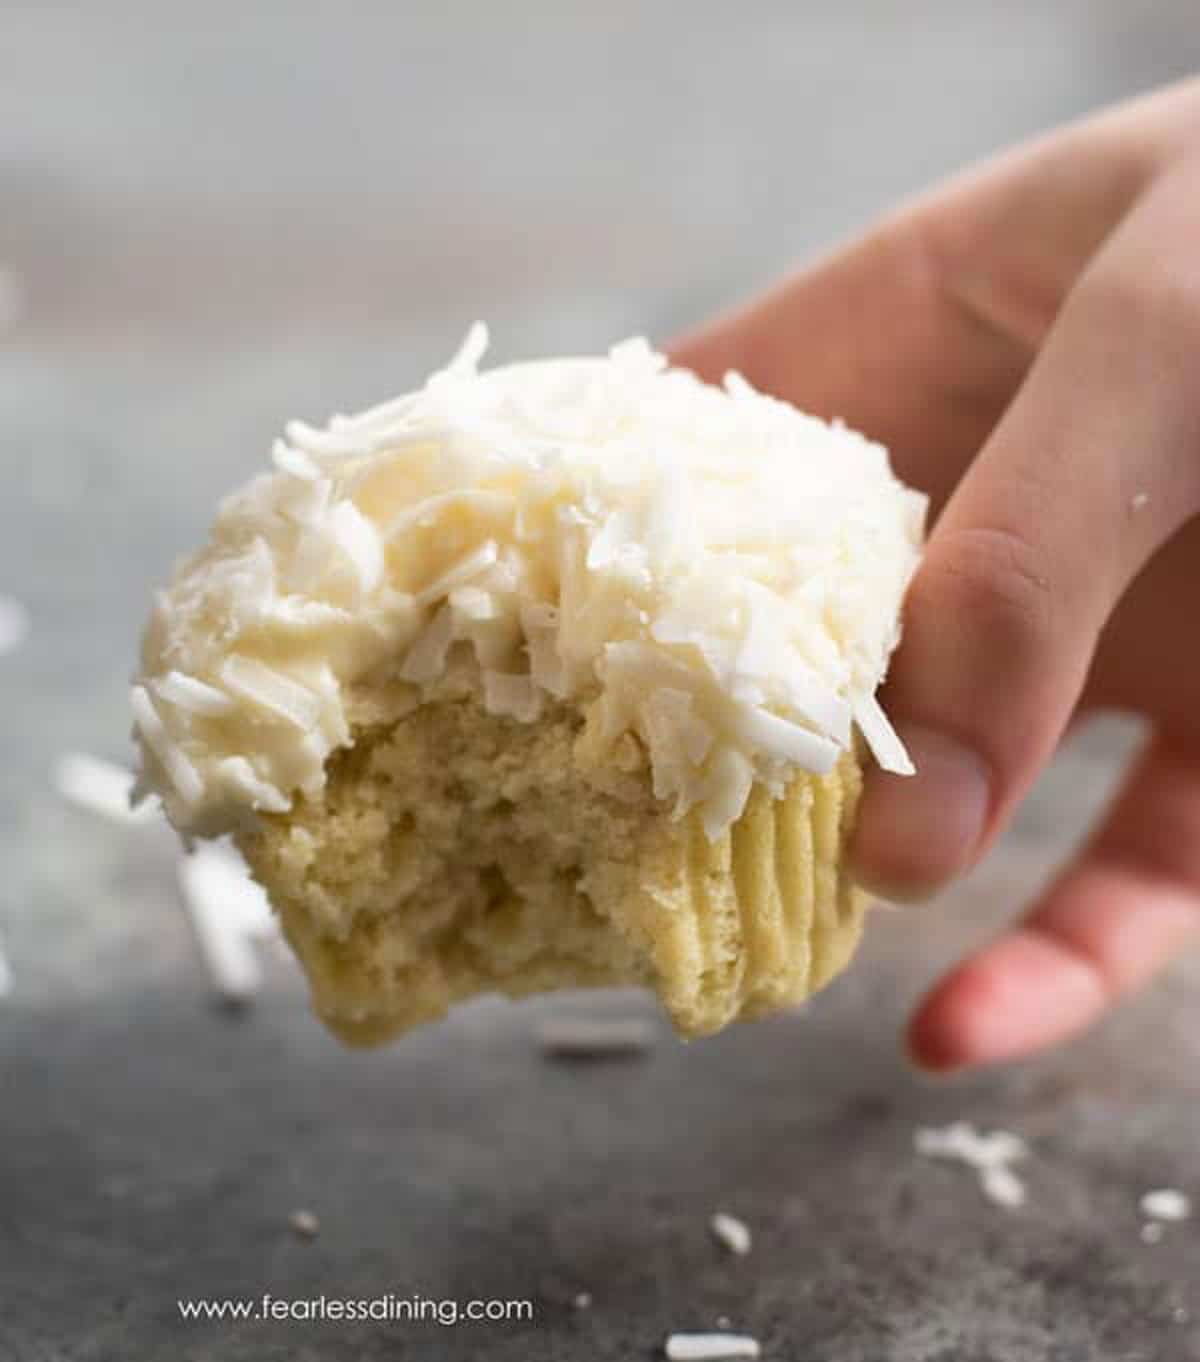 a hand holding a cupcake with a bite taken out